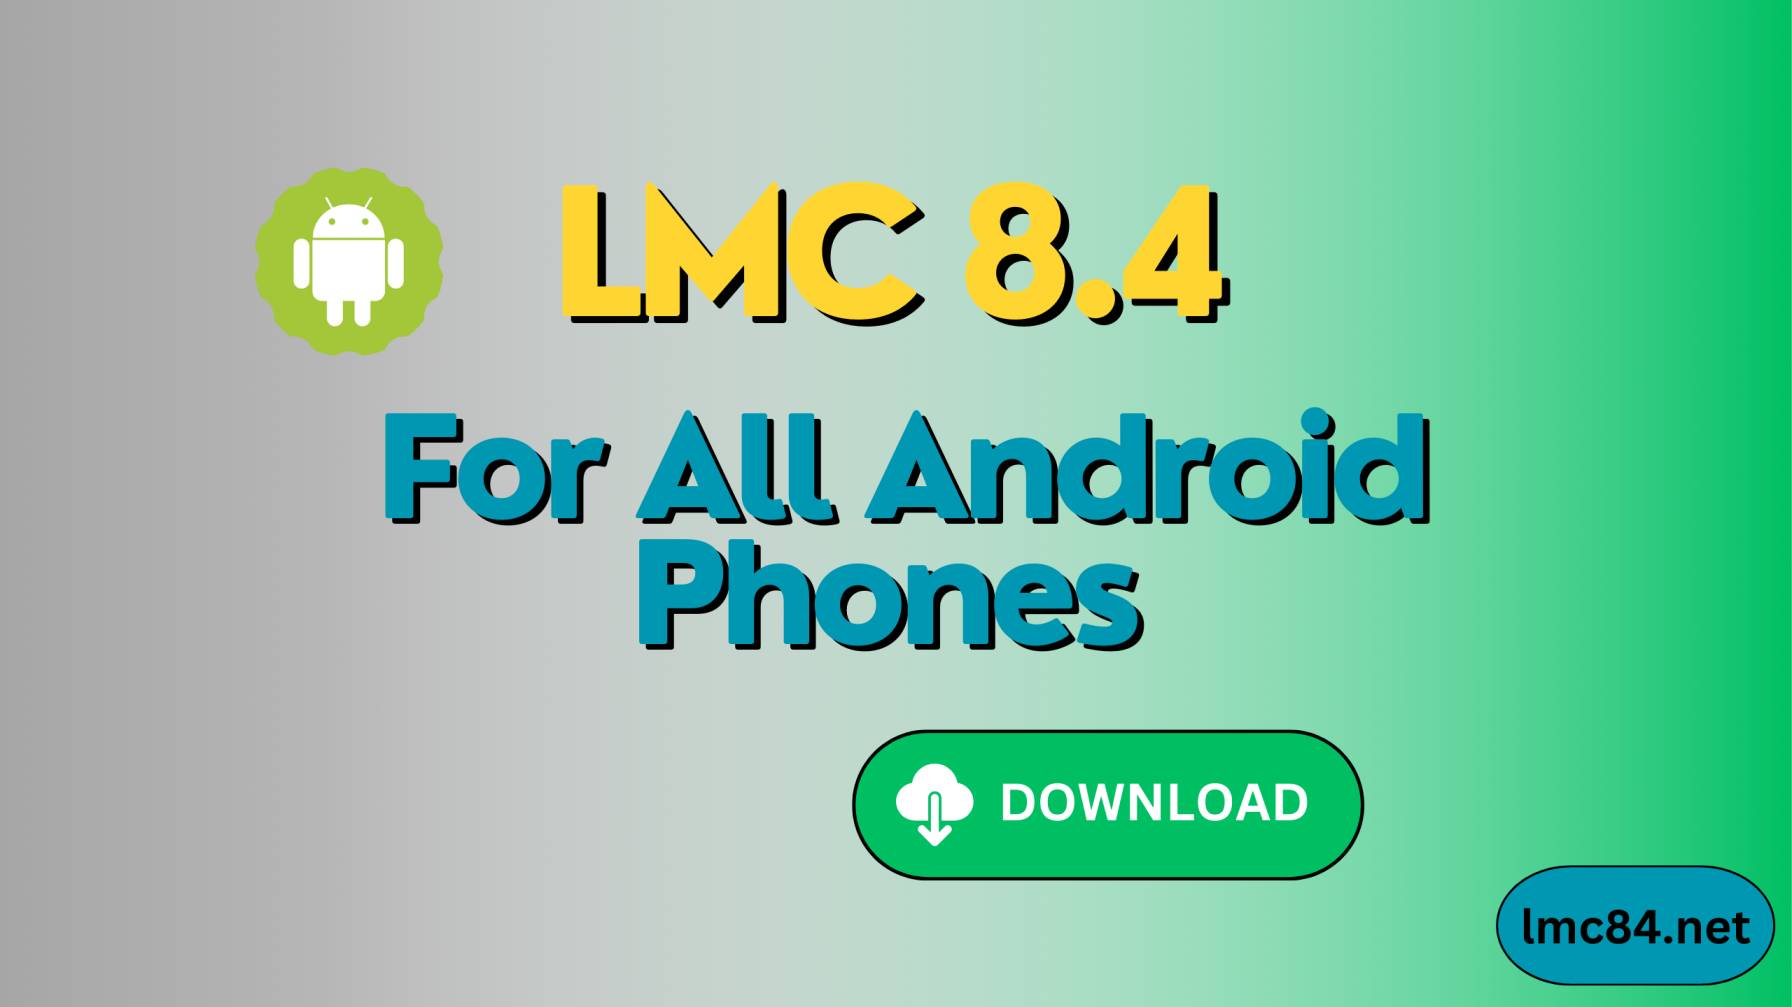 Download LMC 8.4 For All Android Phones